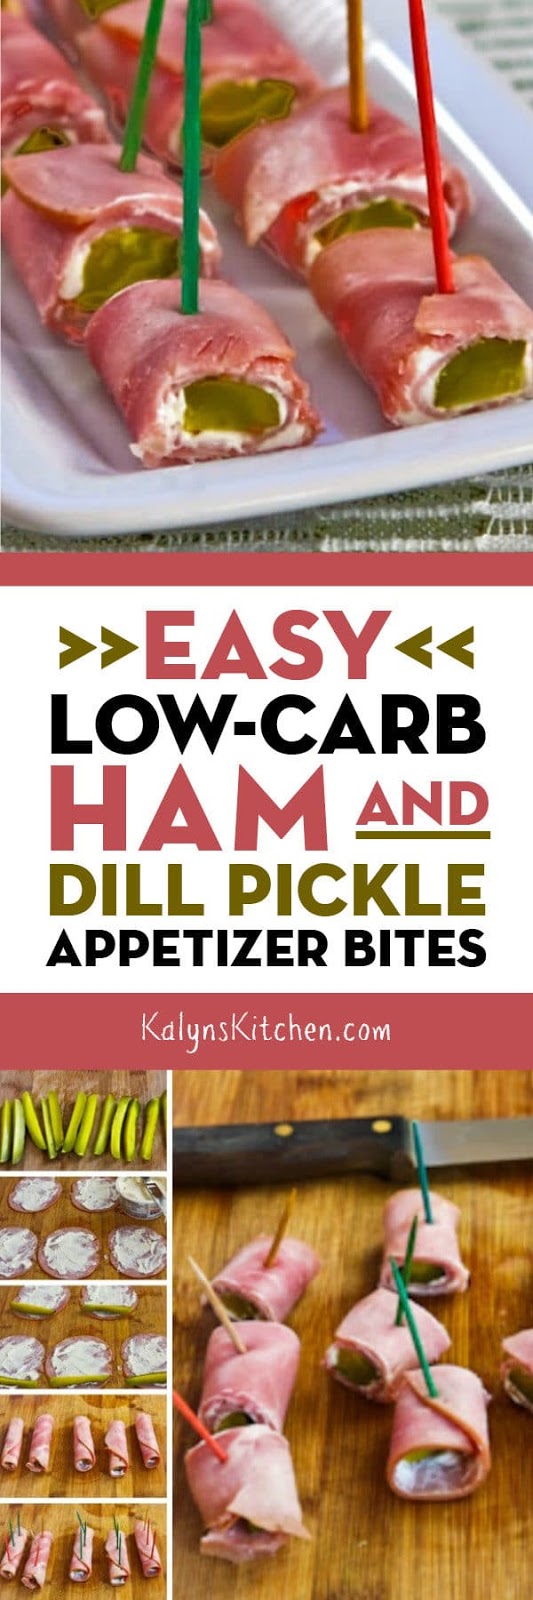 EASY LOW-CARB HAM AND DILL PICKLE APPETIZER BITES - Recipe Daily Mom